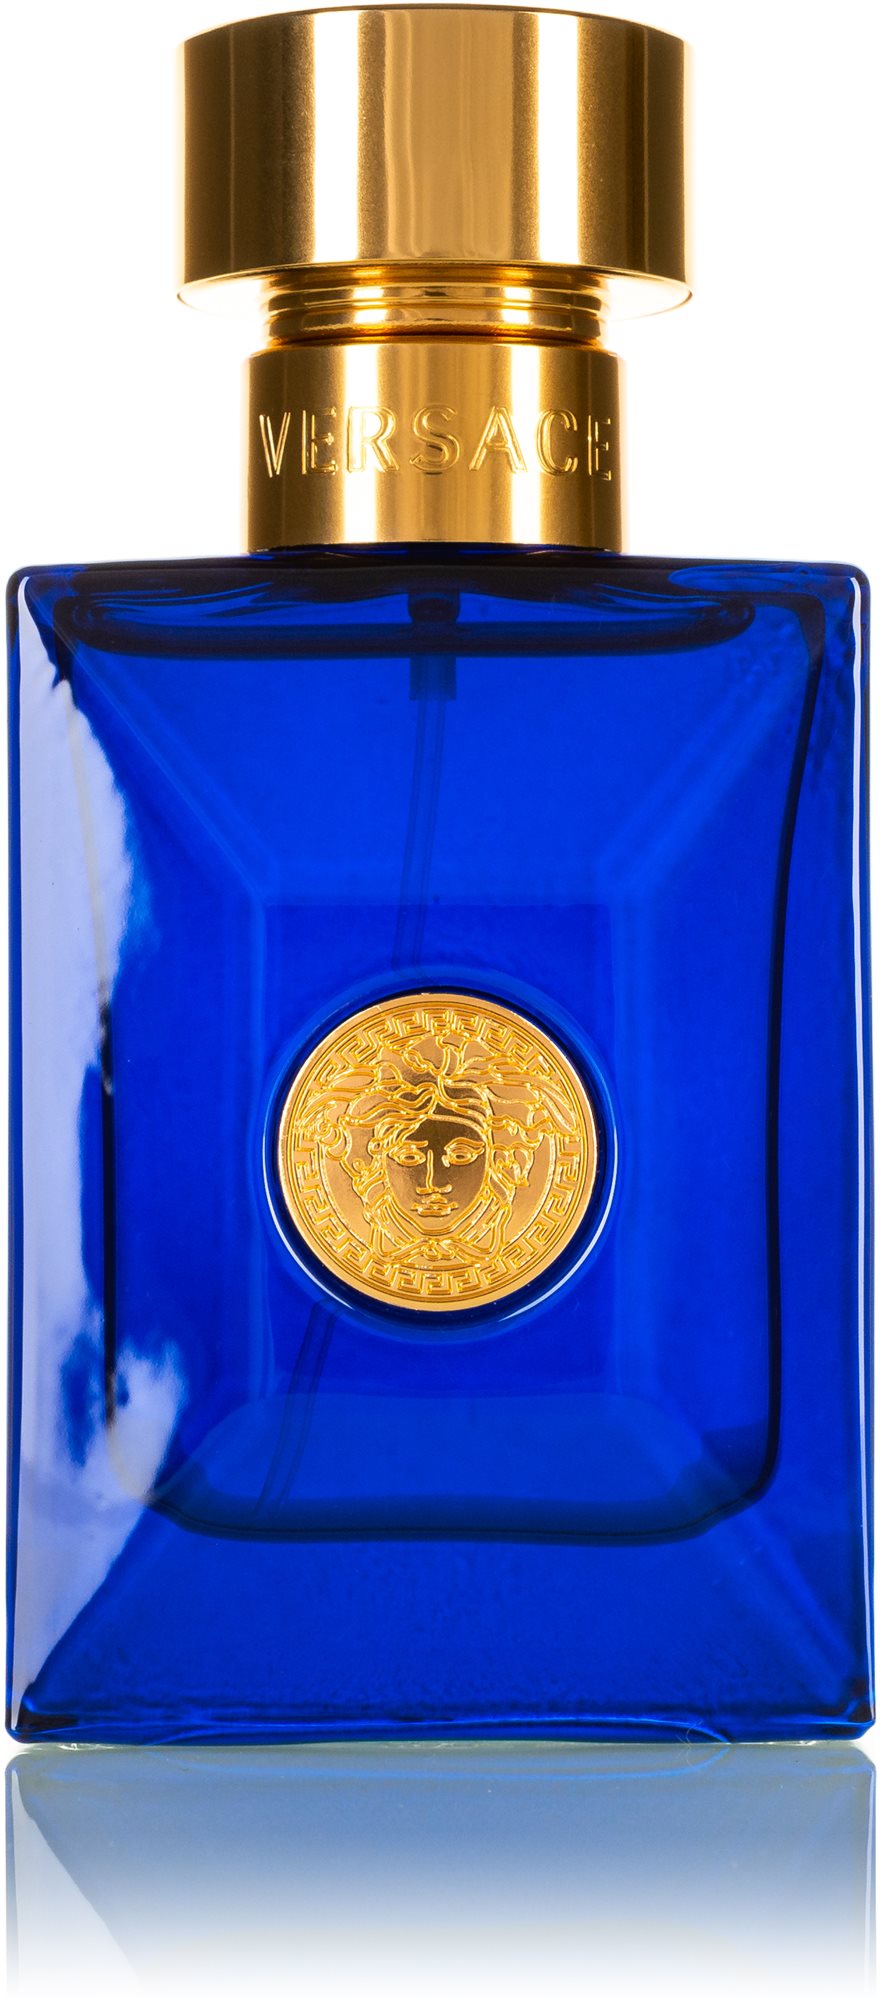 VERSACE Pour Homme Dylan Blue EdT 30 ml